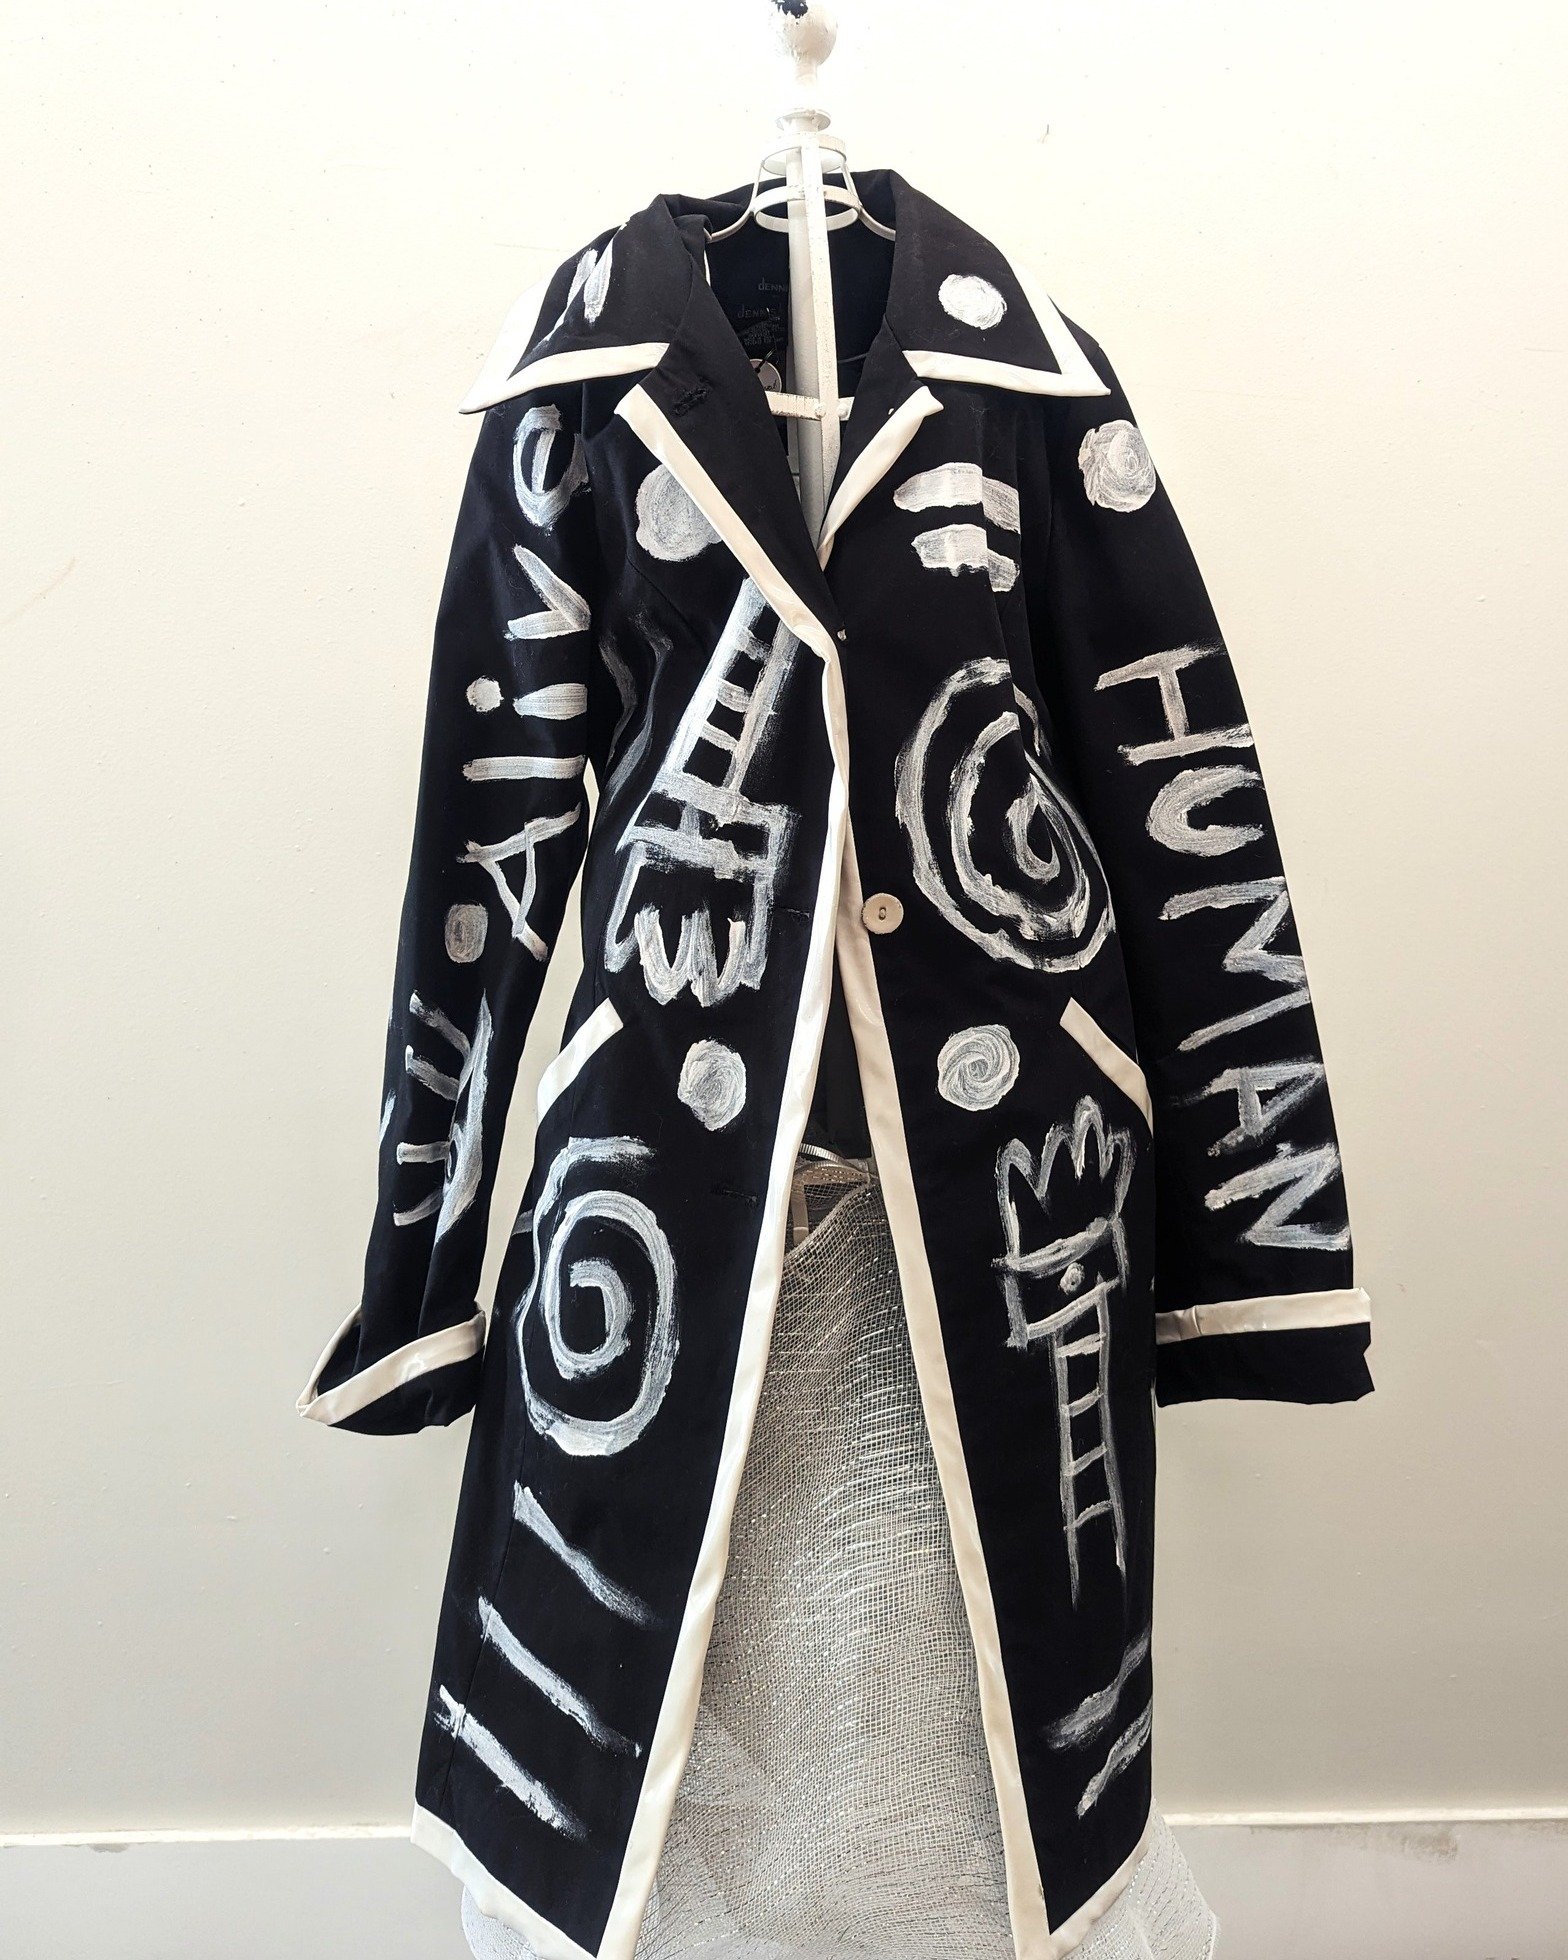 LOVE=HUMAN
This stunning jacket from our friend Mary Seay will cause a scene.
Don't miss your chance to bid on this jacket!
Get your tickets now!
https://www.councilforthearts.net/
Sunday, April 21st 1-3 pm at the Council for the Arts 
103 North Main